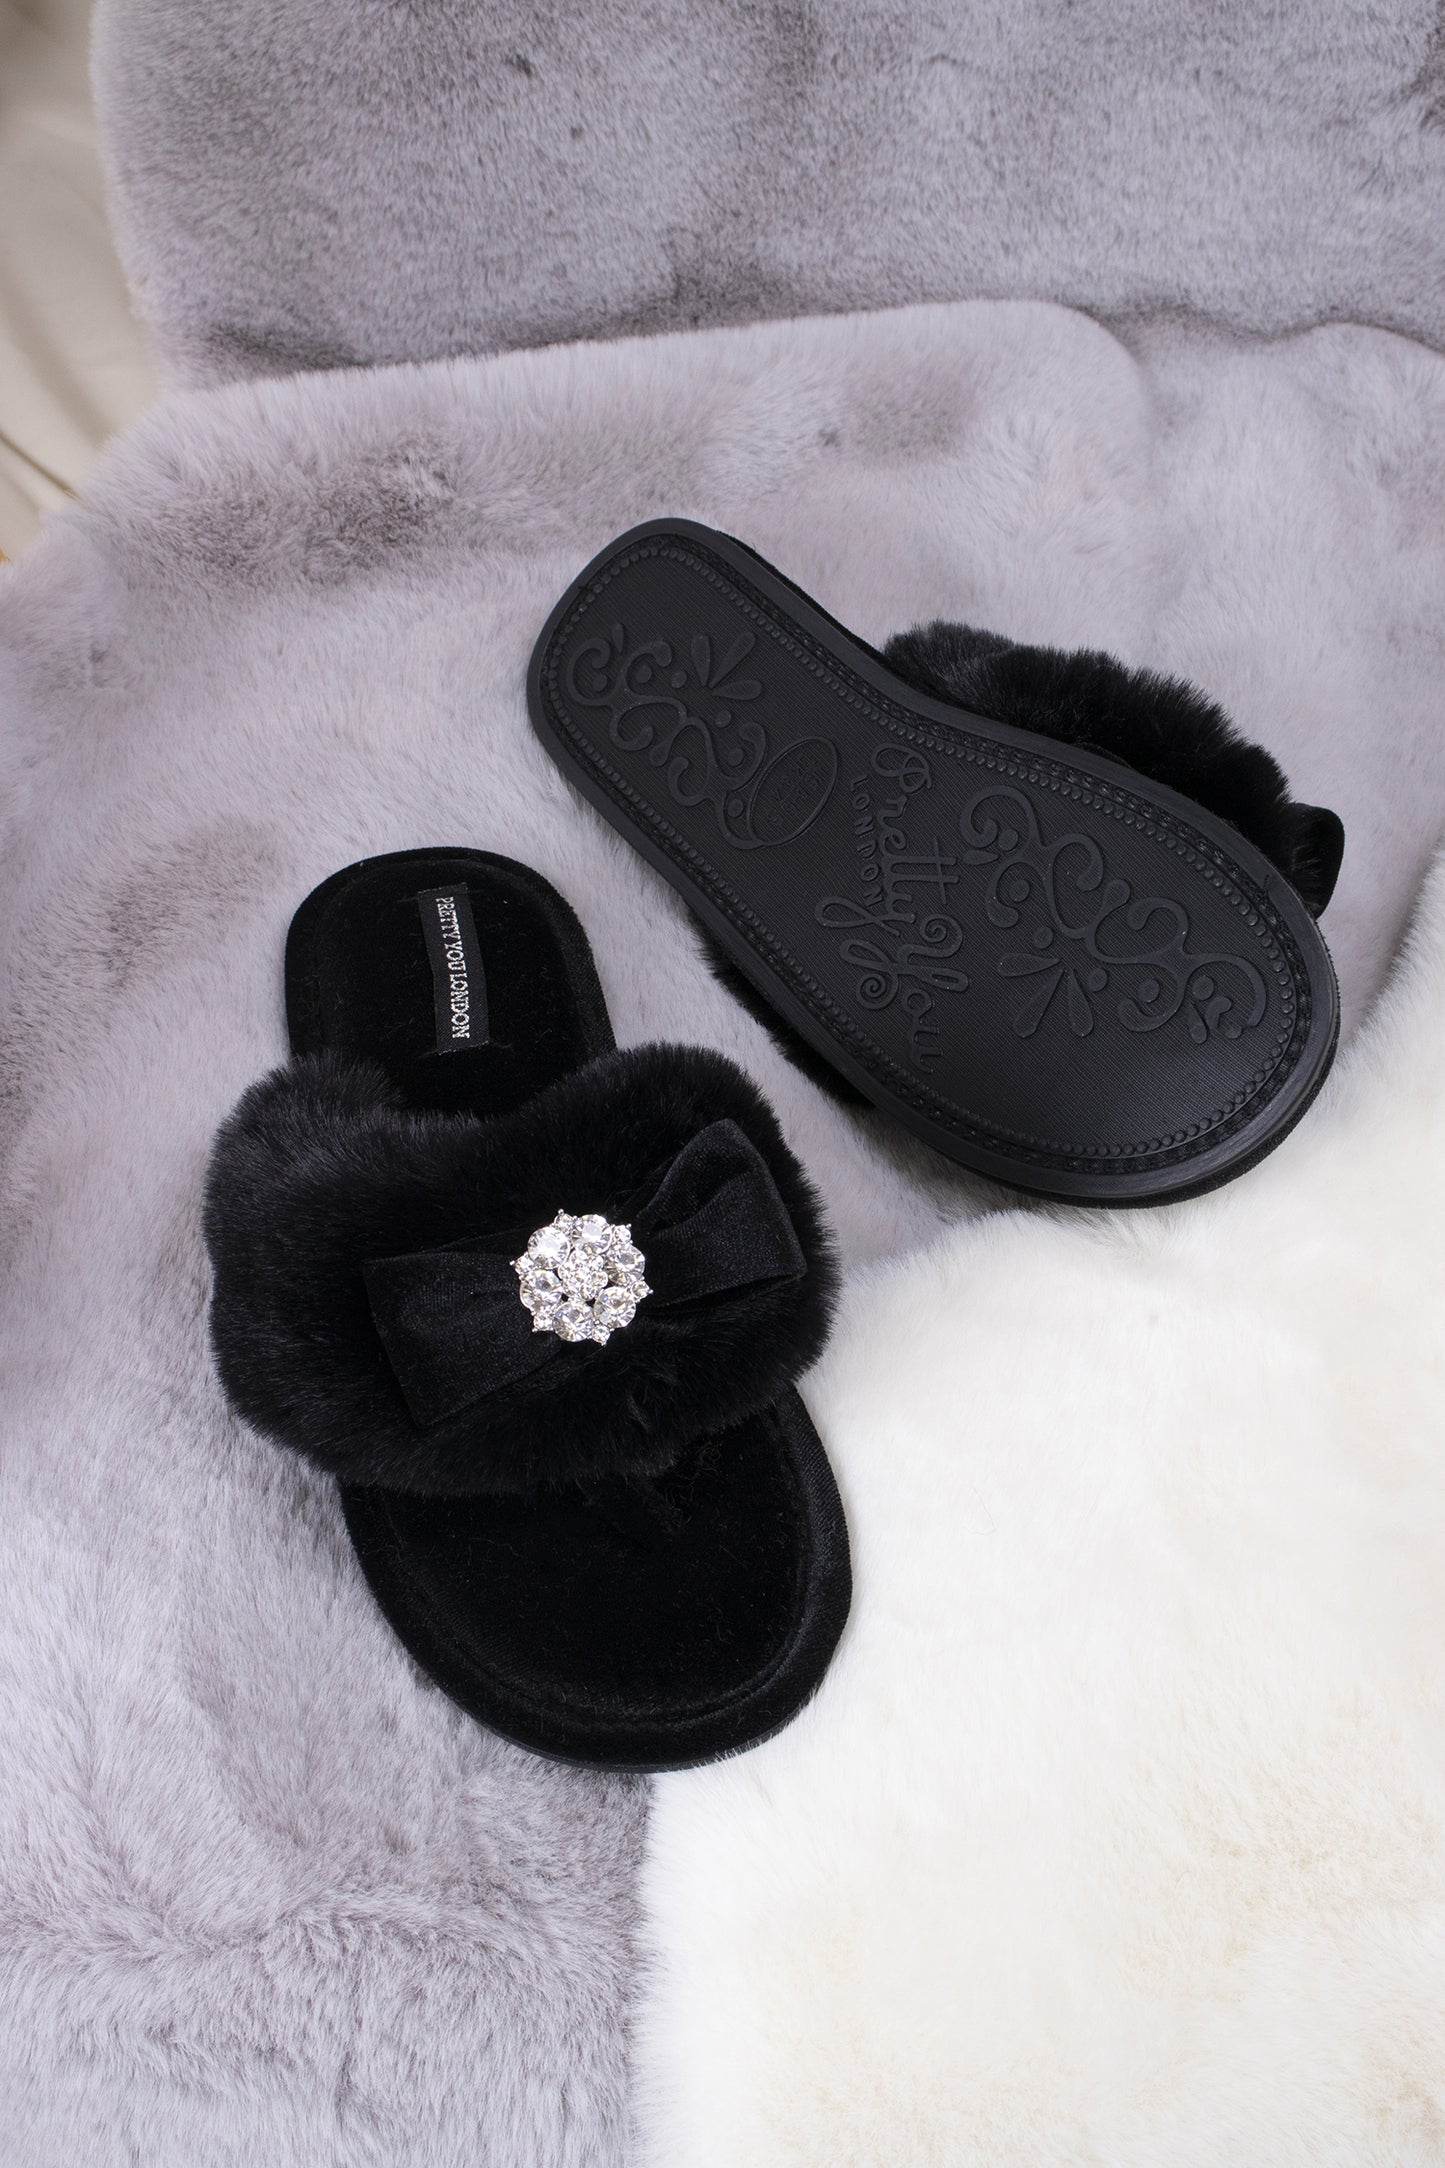 
                  
                    Amelie women's toe post slippers in black with a premium velvet bow and diamante embellishment atop a plush faux fur band from Pretty You London
                  
                